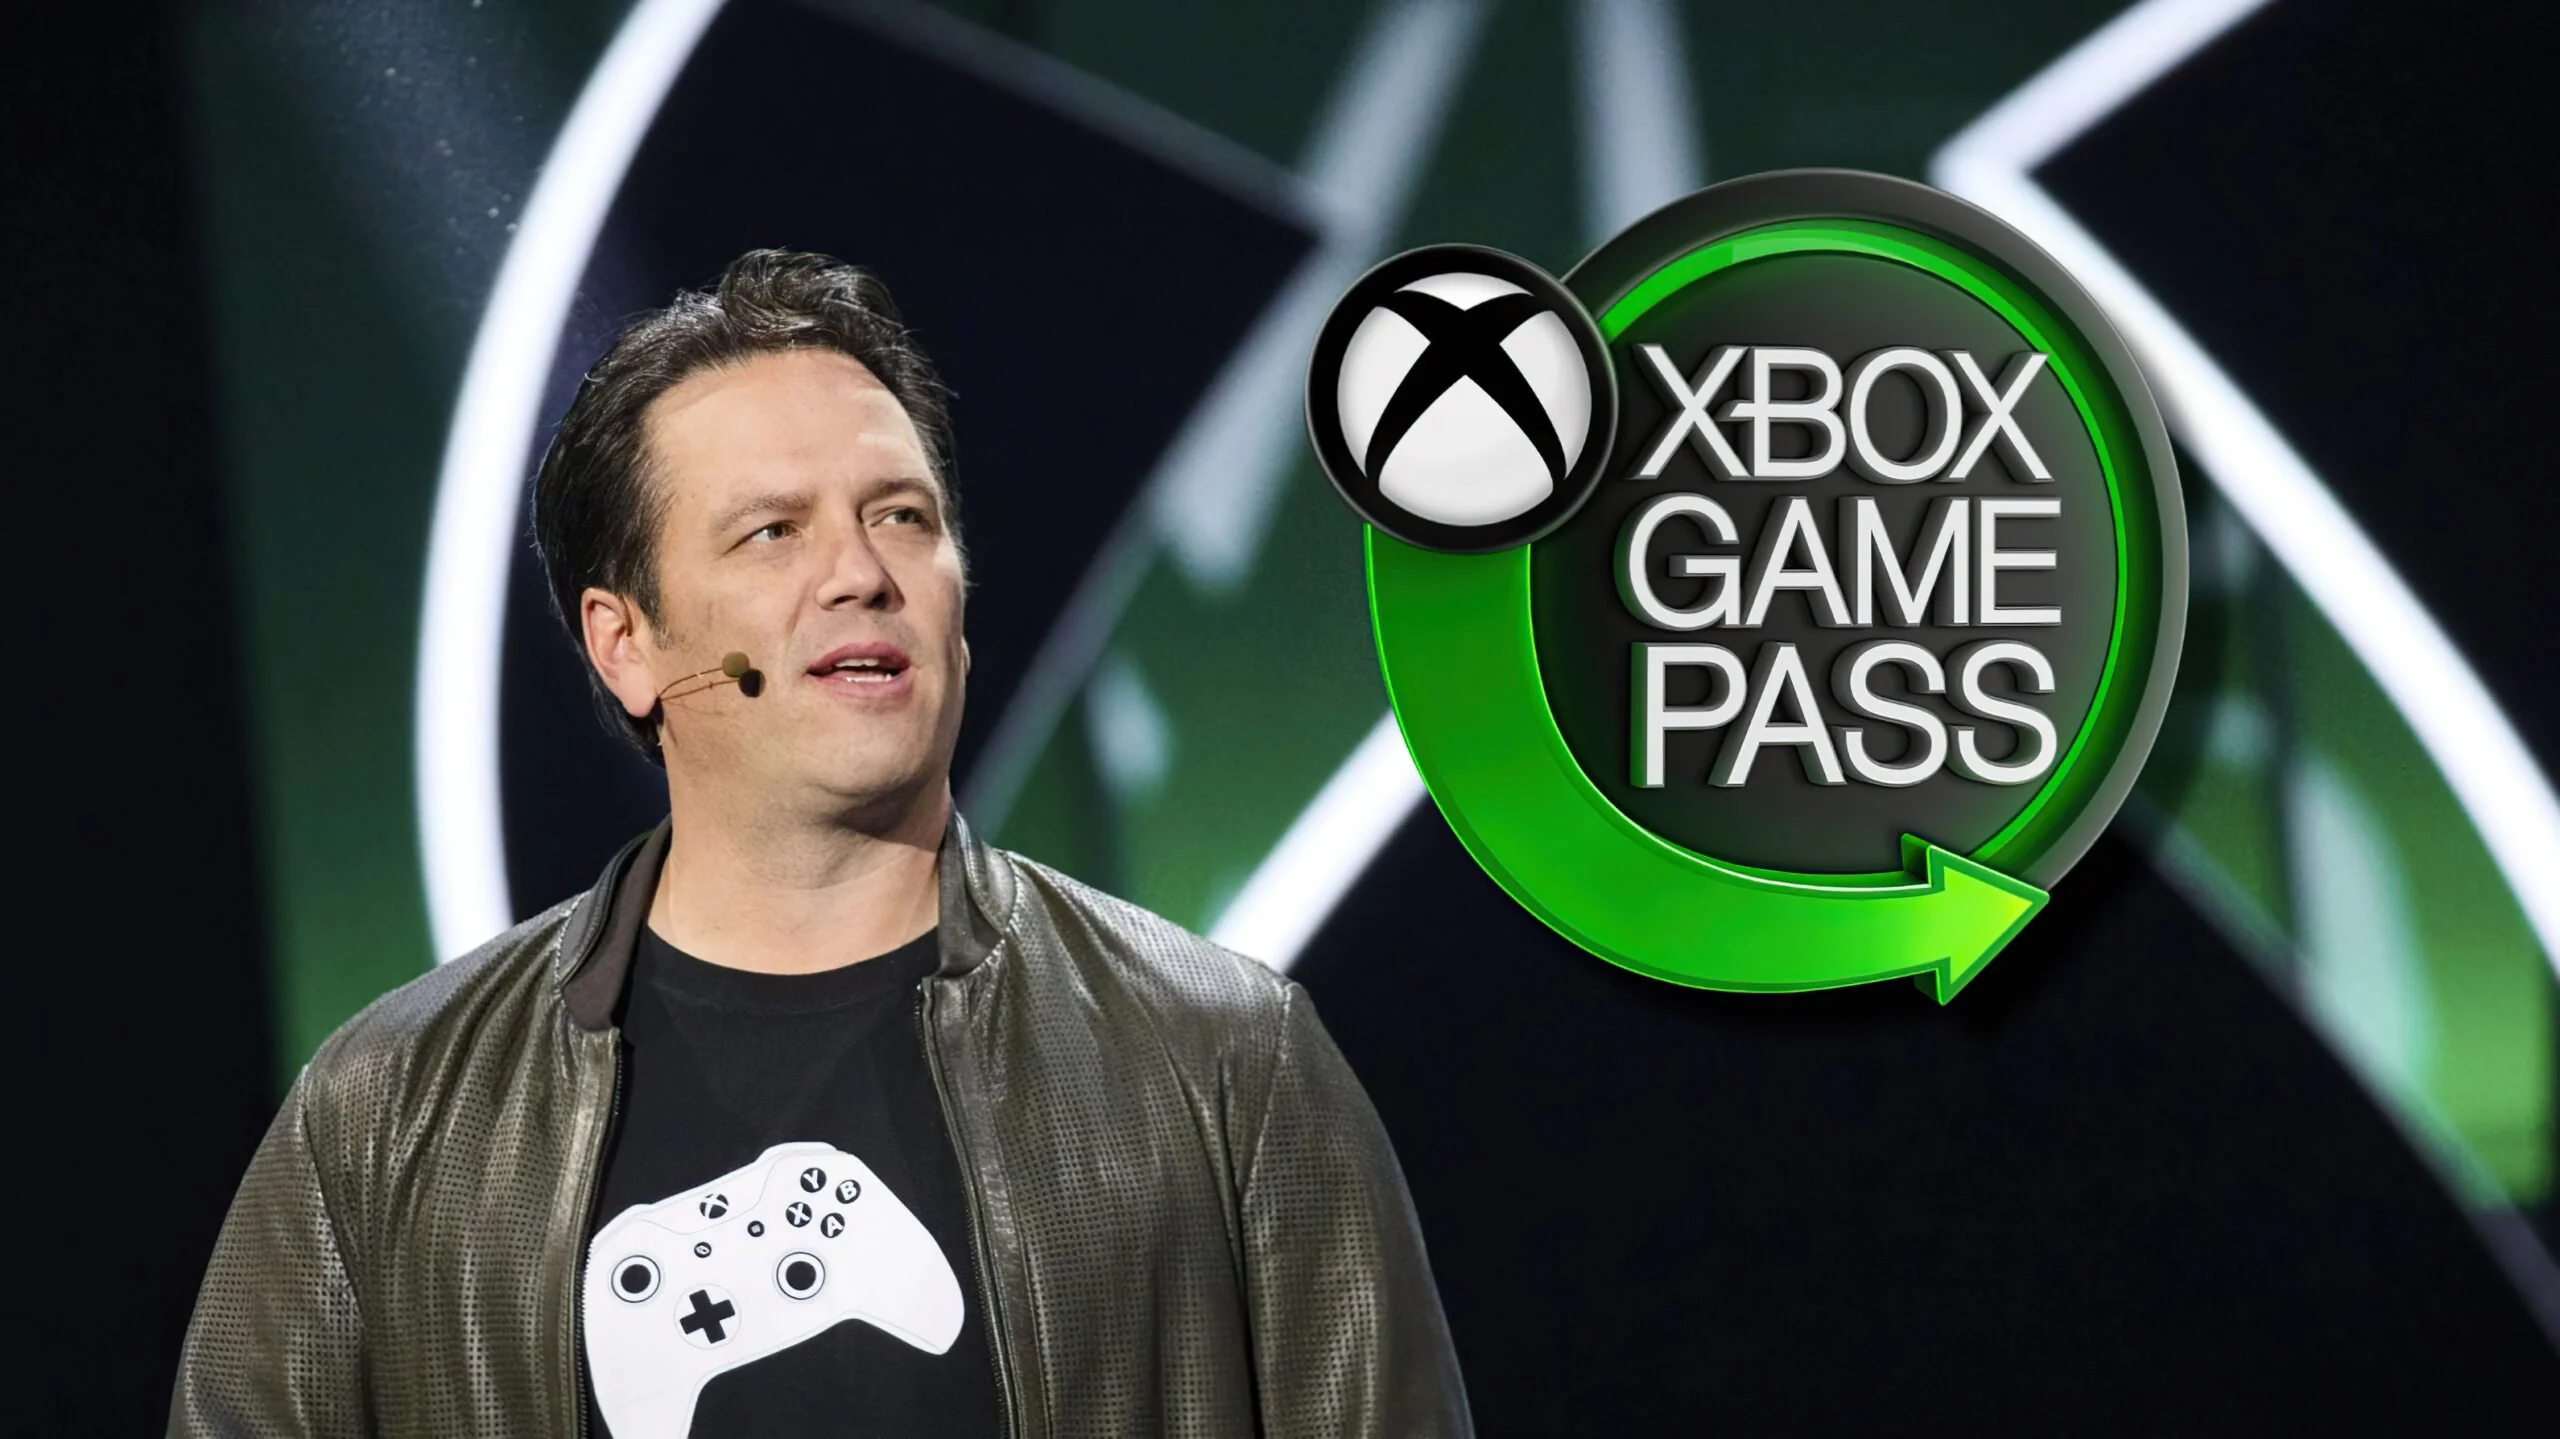 Xbox Chief Calls Out Game Price Hikes: Why Paying More Isn't Always Better for Gamers